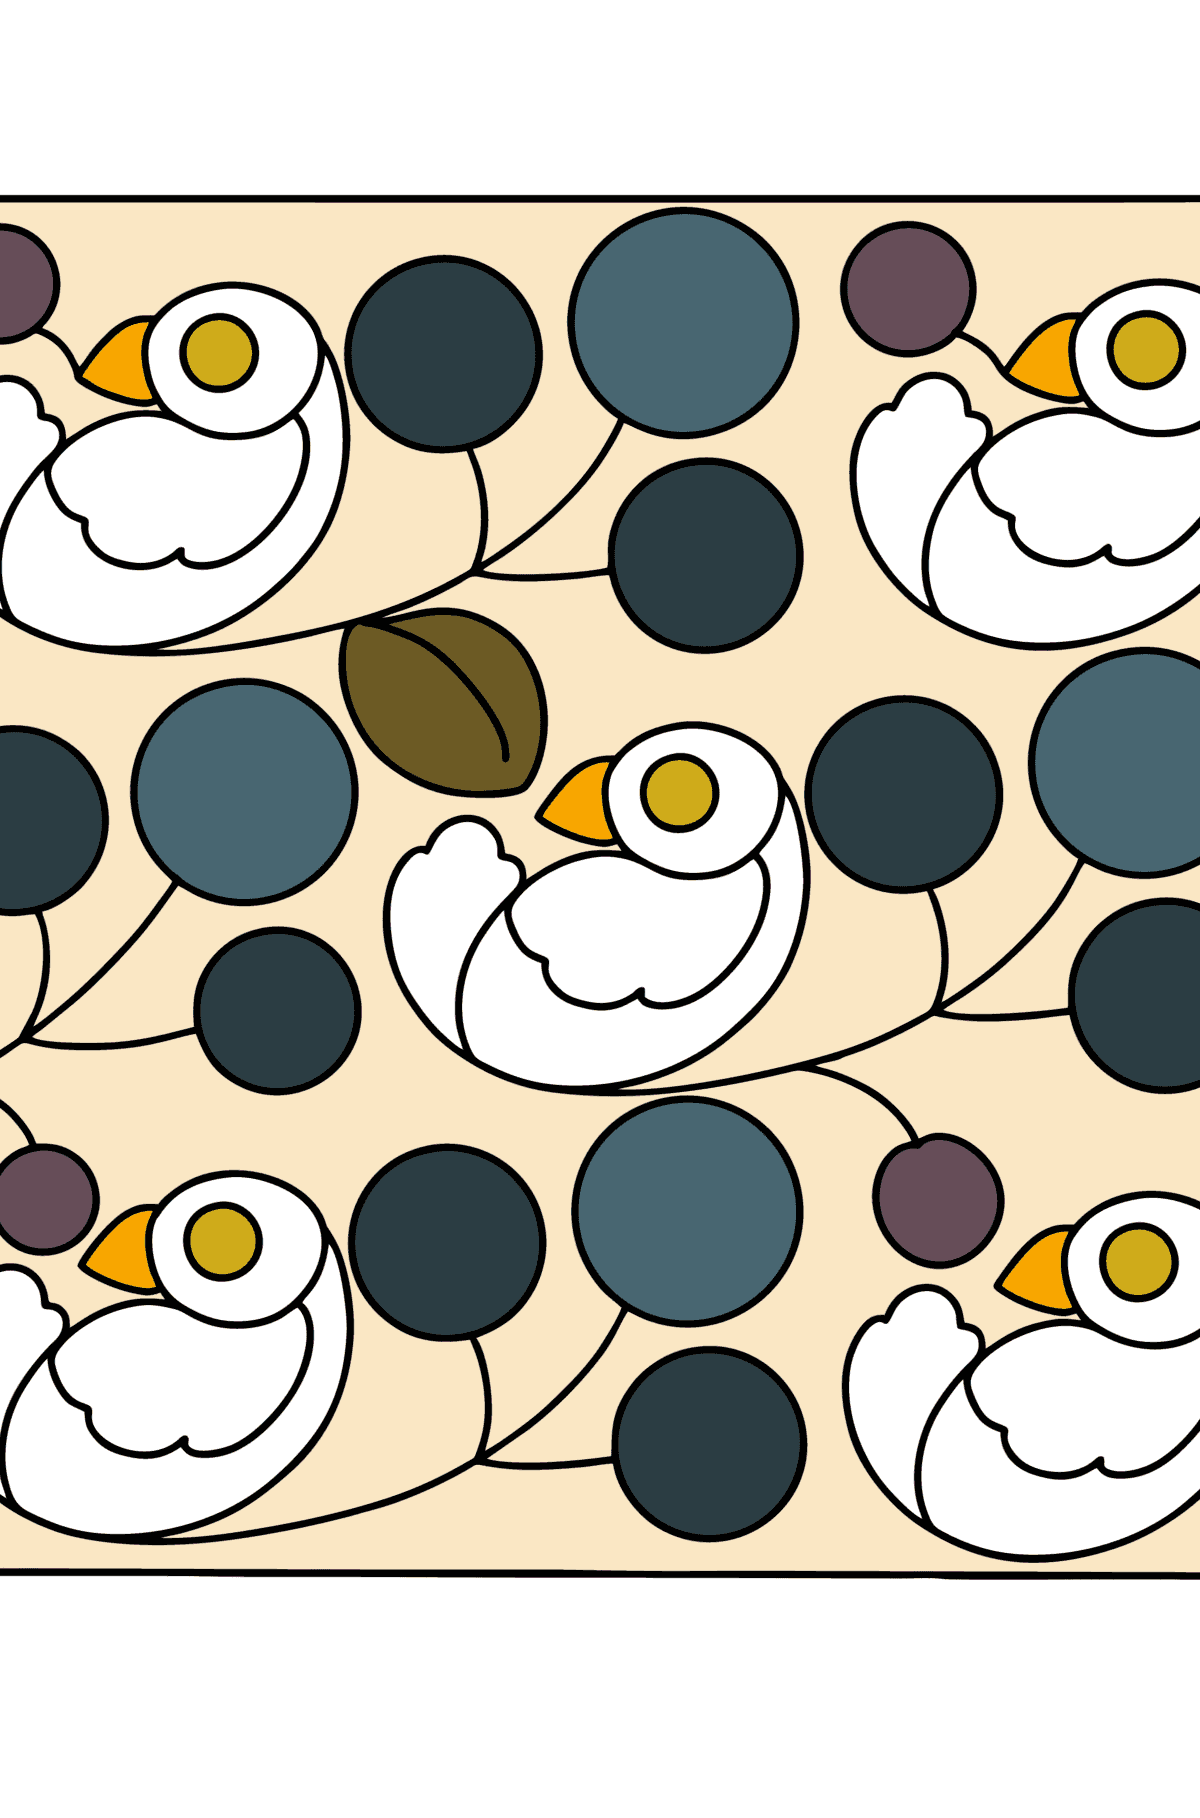 Bird Pattern coloring page - Coloring Pages for Kids